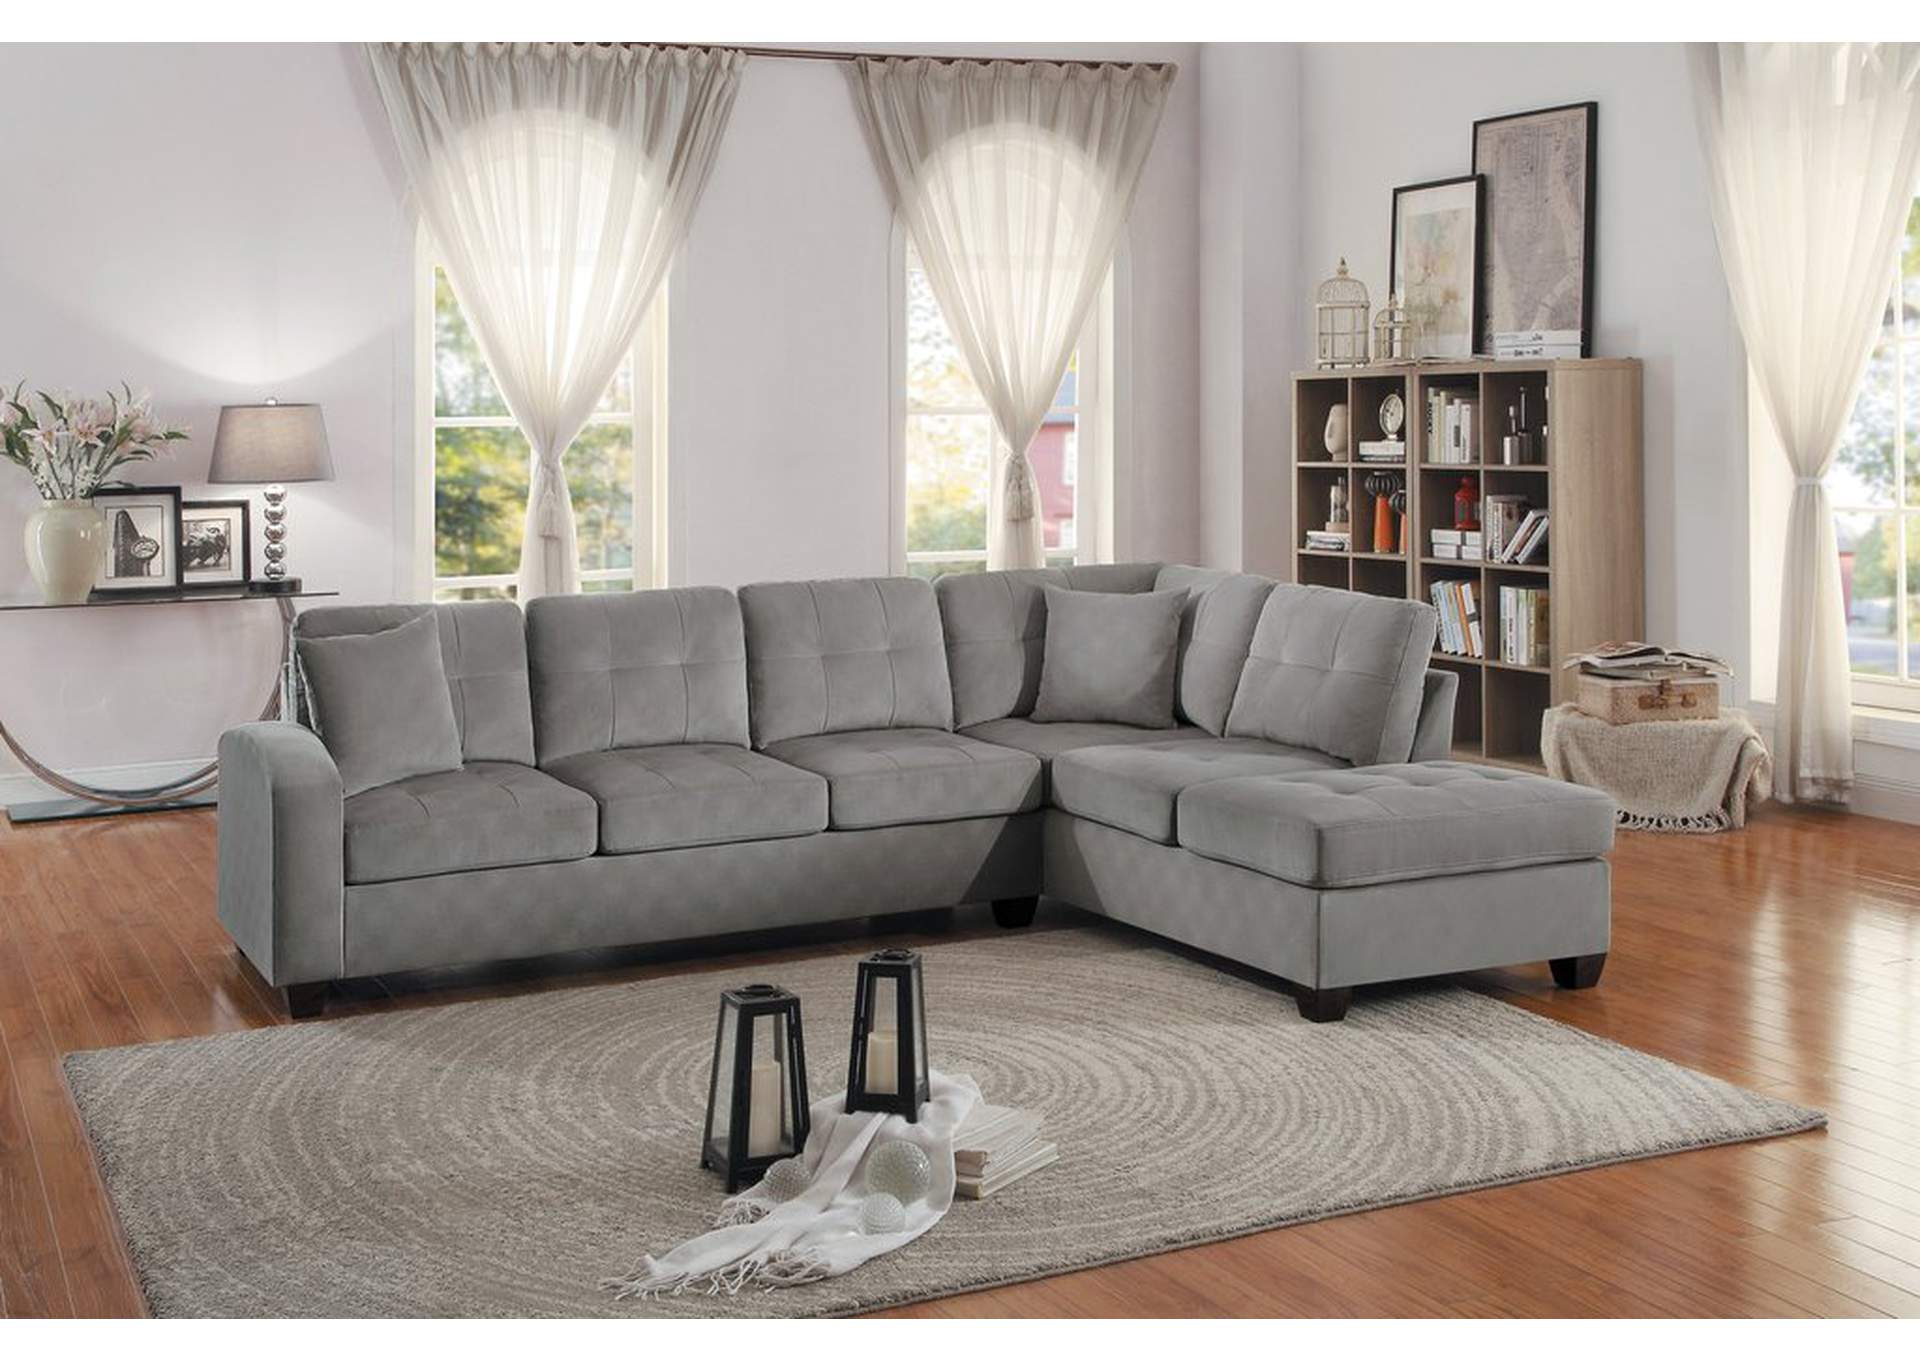 Lsf/Rsf 3-Seater,Reversible,Taupe Fabric,Homelegance